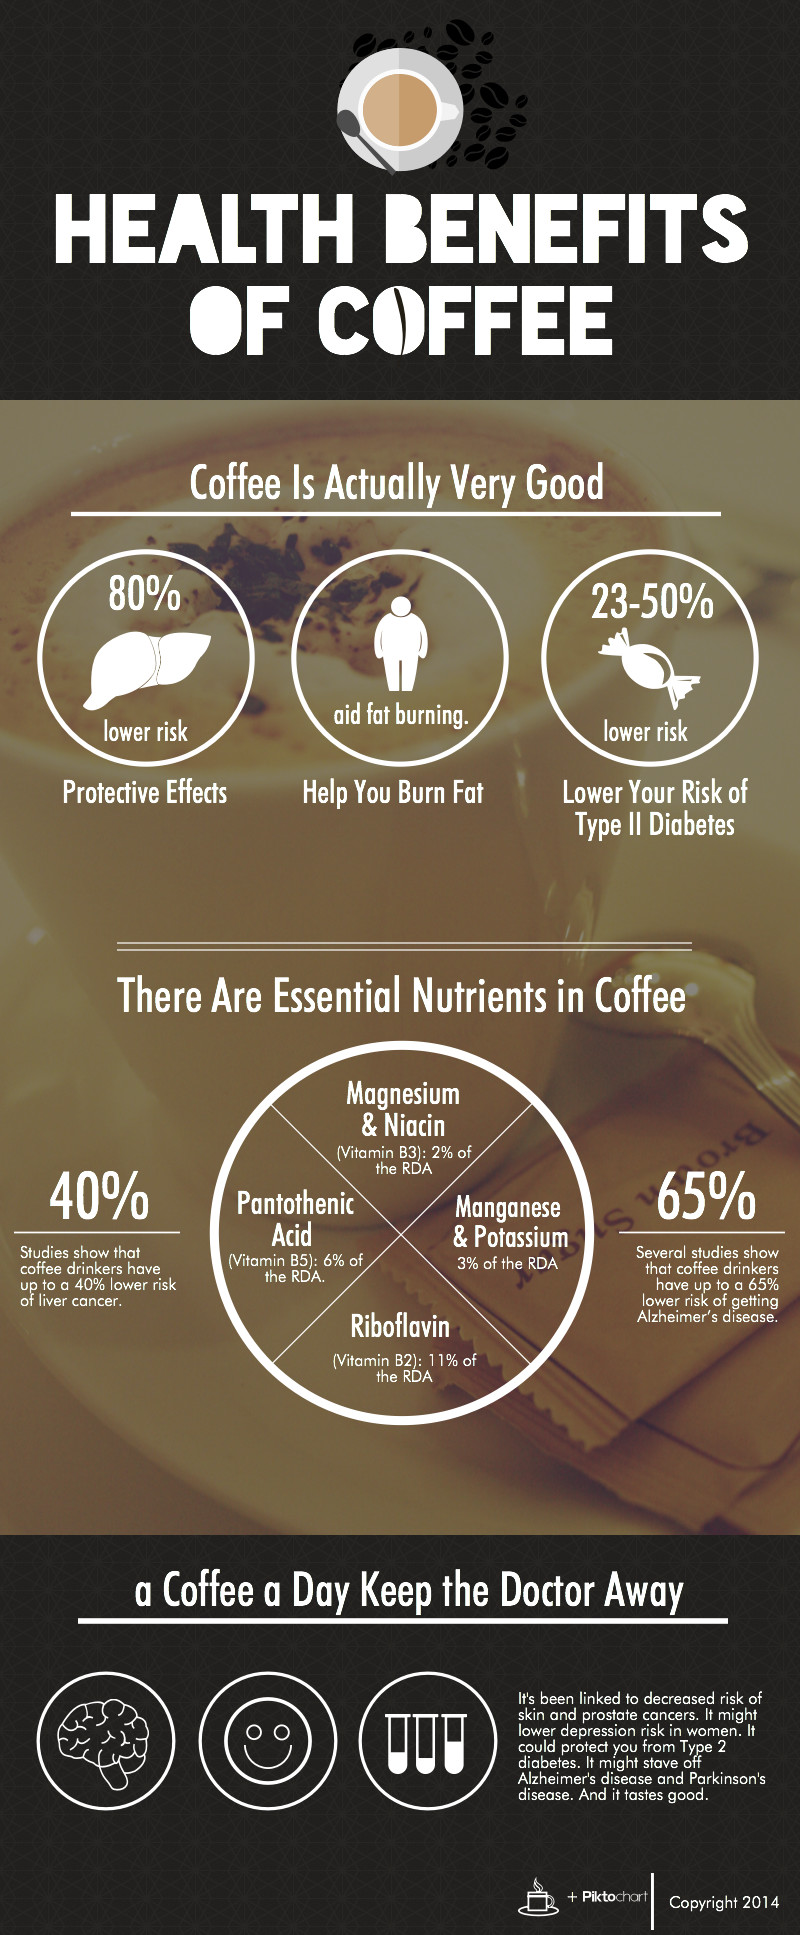 Coffee is loaded with beneficial antioxidants and nutrients that can improve your overall health. It actually does increase your energy in a natural way! benefits drinking coffee